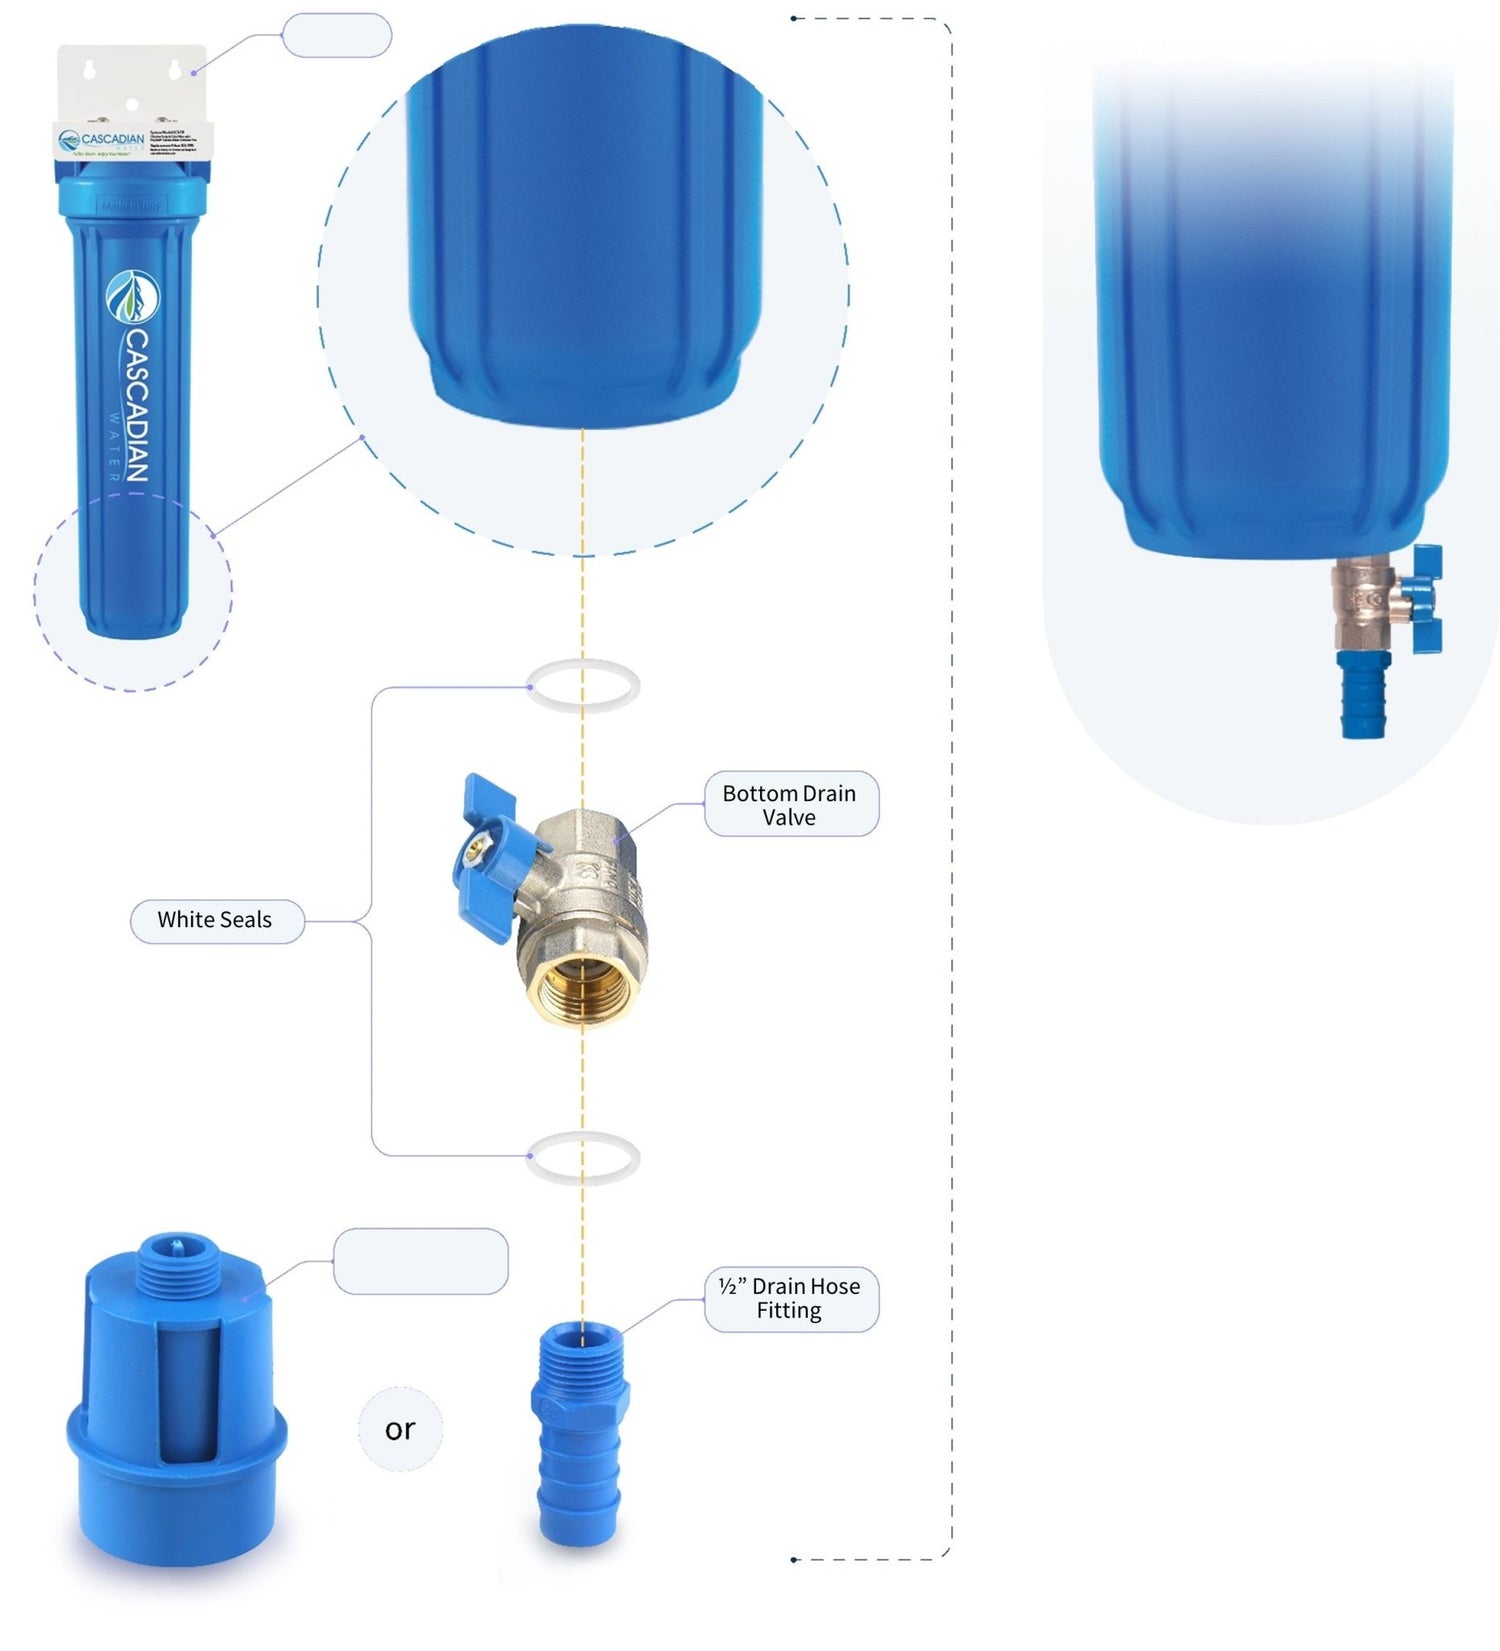 ICS-P - Complete Treatment System - Cascadian Water